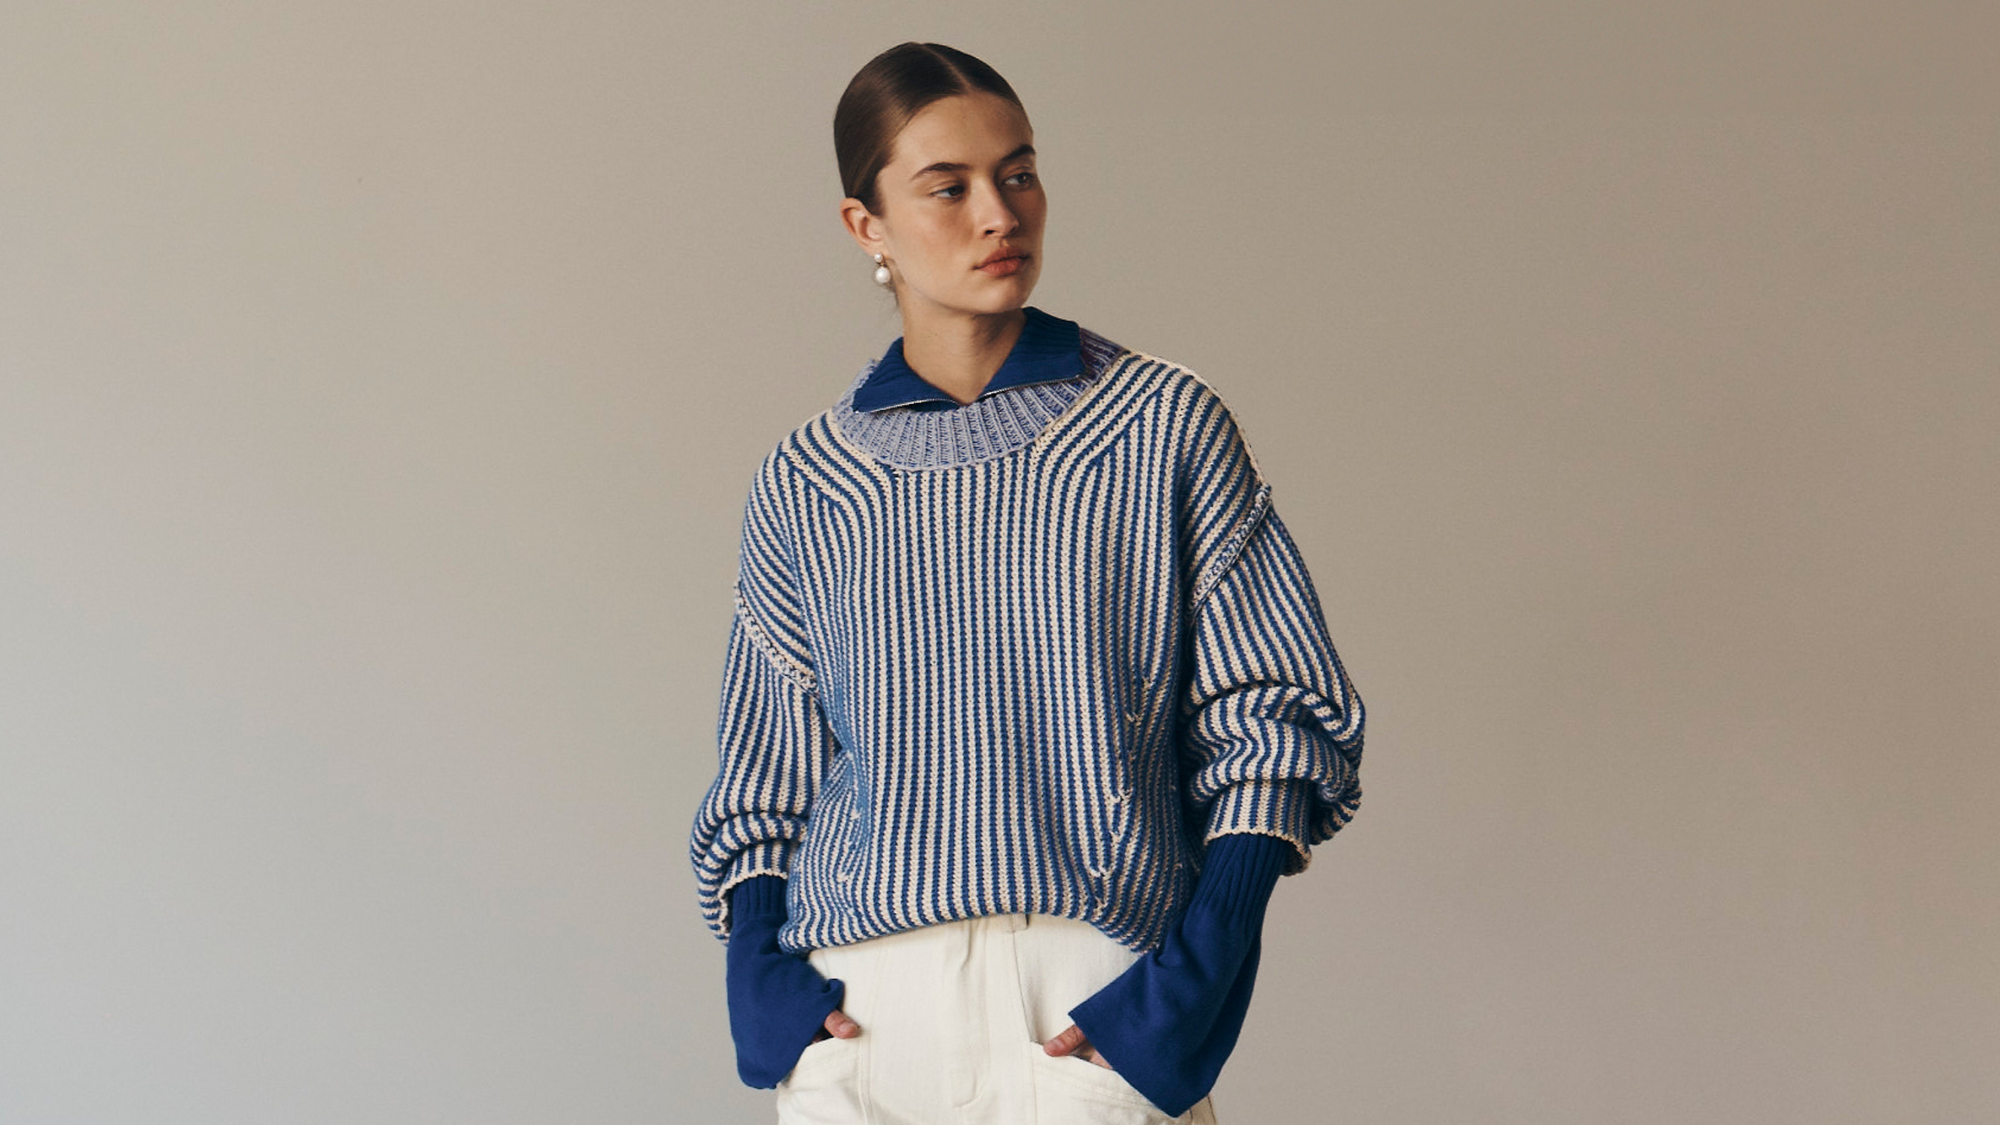 Bianca wears the Tish Knit Jumper in Cobalt over the Travis Zip Knit Top in Cobalt paired with the Gio Jeans in Cream. She accessorises with pearl drop earrings and completes the look with a low, slick bun. 